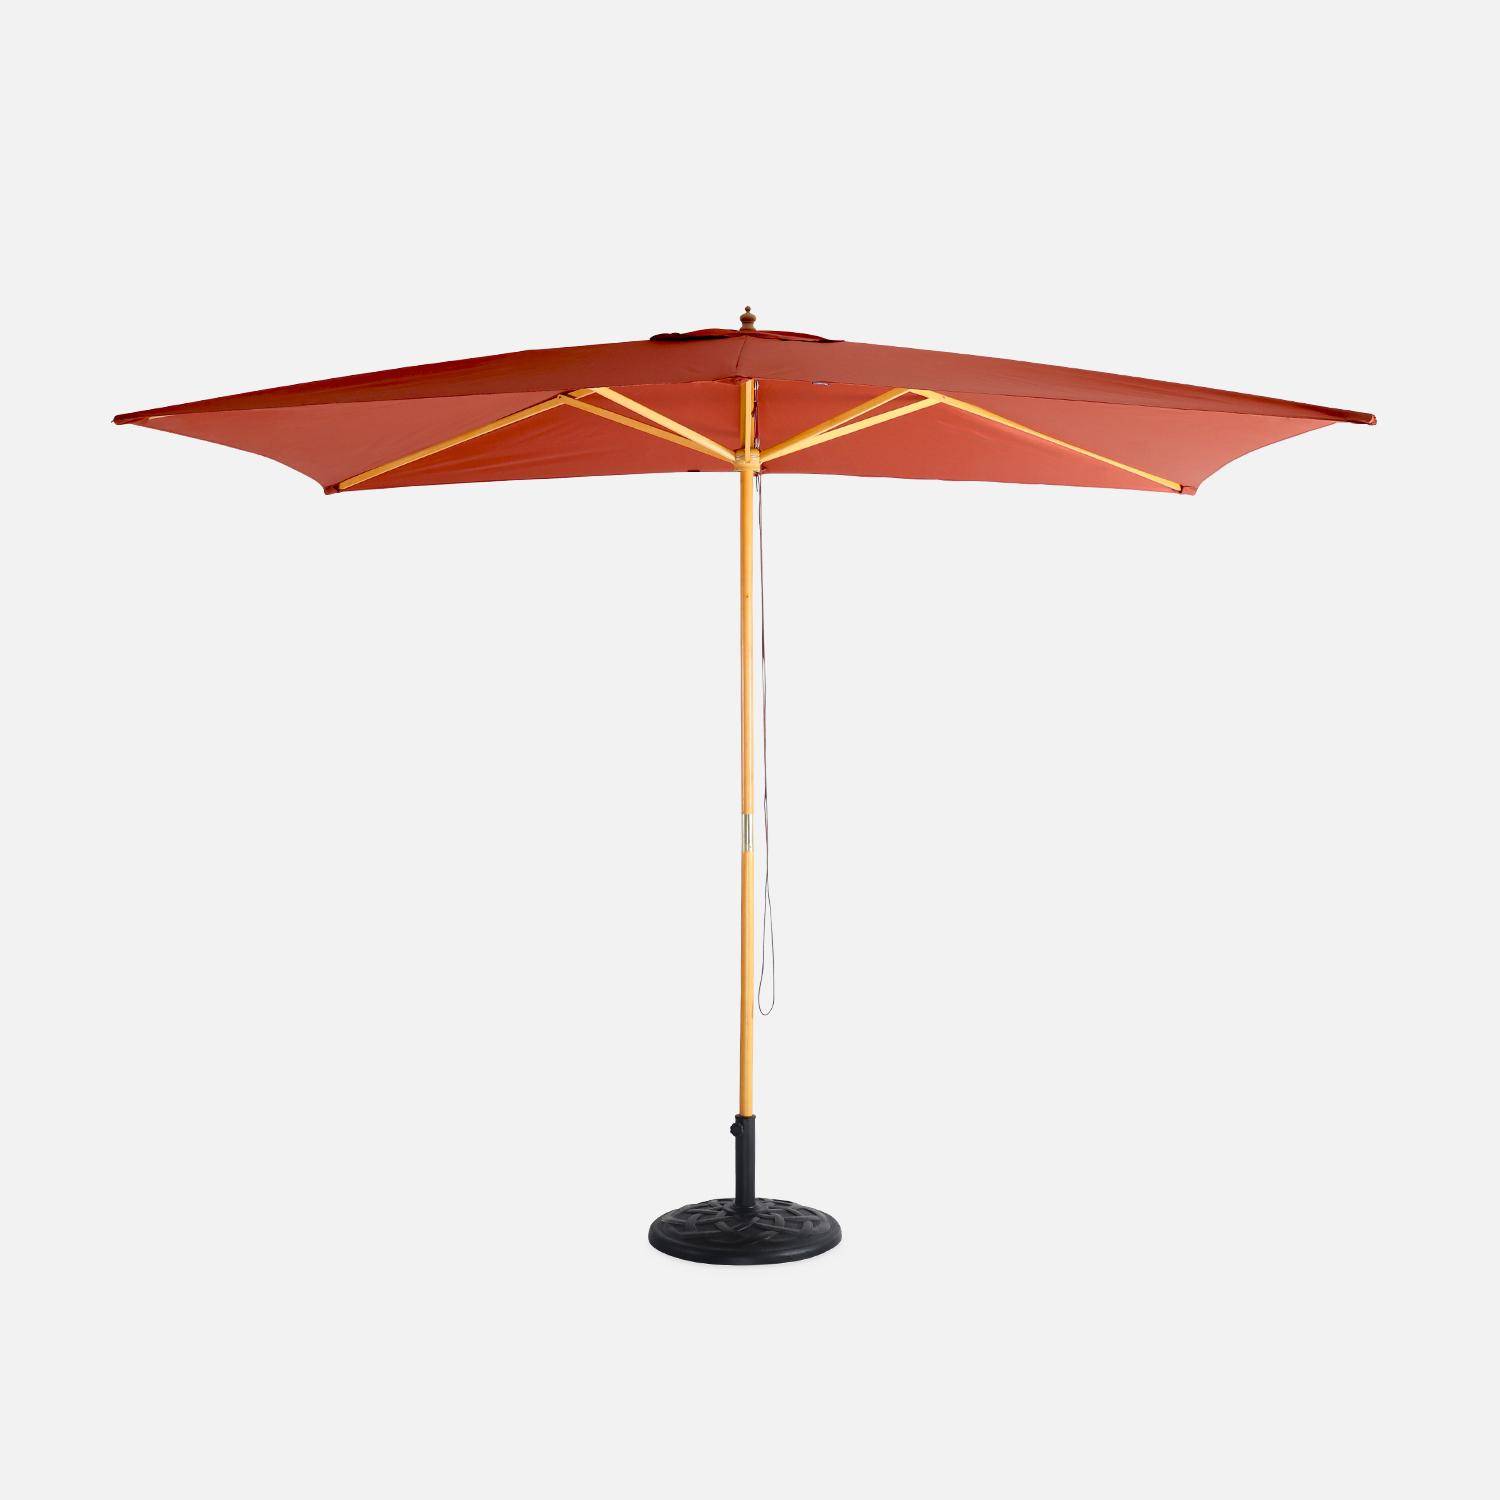 Straight rectangular wooden parasol 2x3m - adjustable central mast in wood and hand pulley opening - Cabourg - Terracotta,sweeek,Photo2